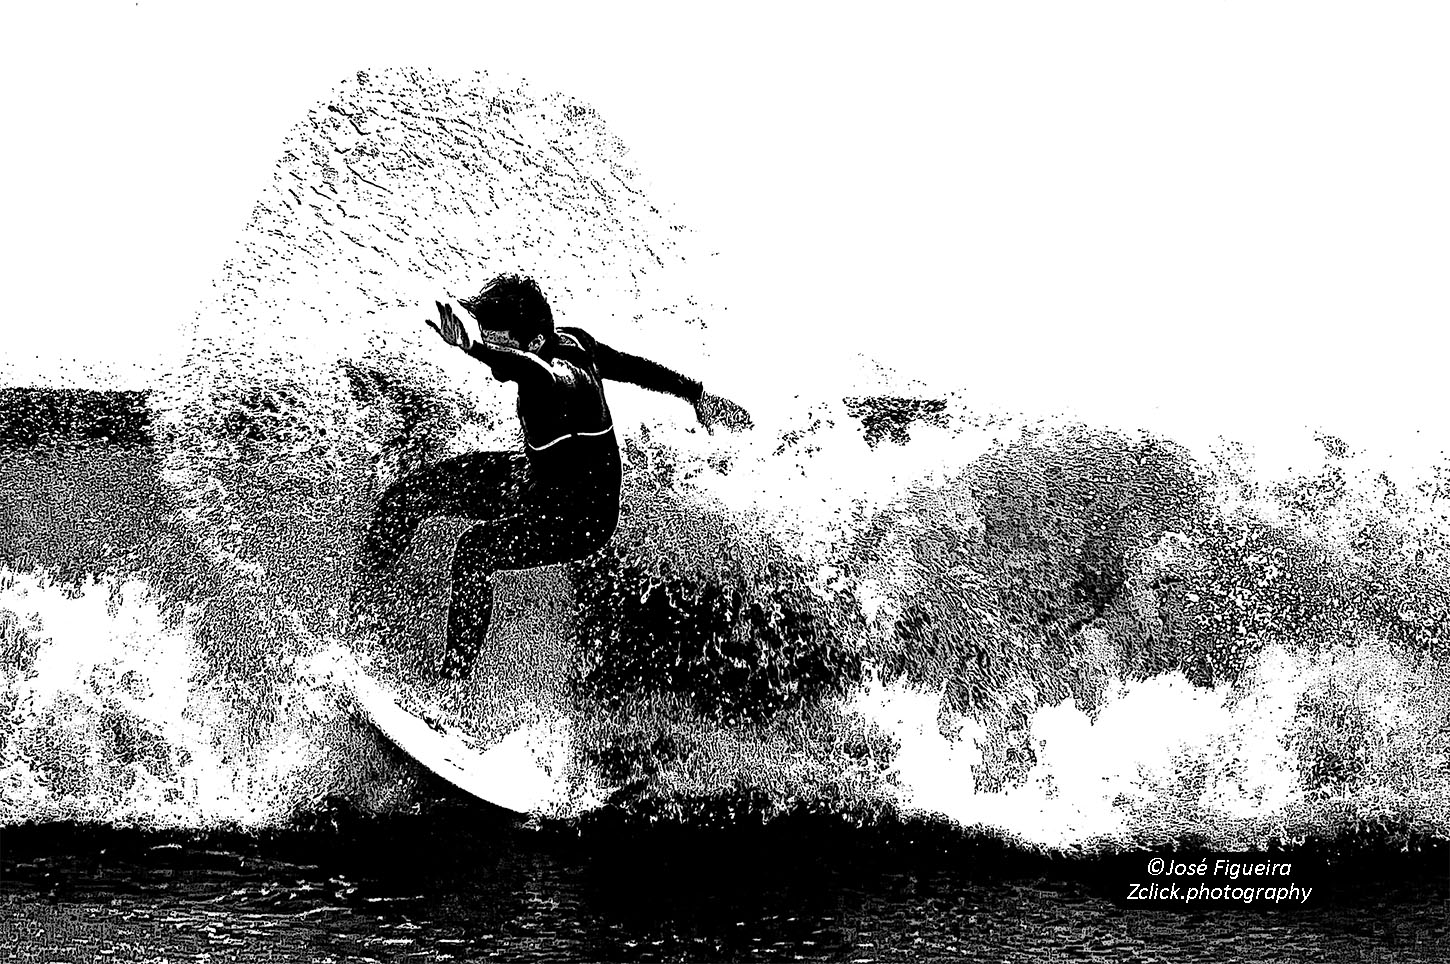 Black and white photographic essays on surfing (2)...